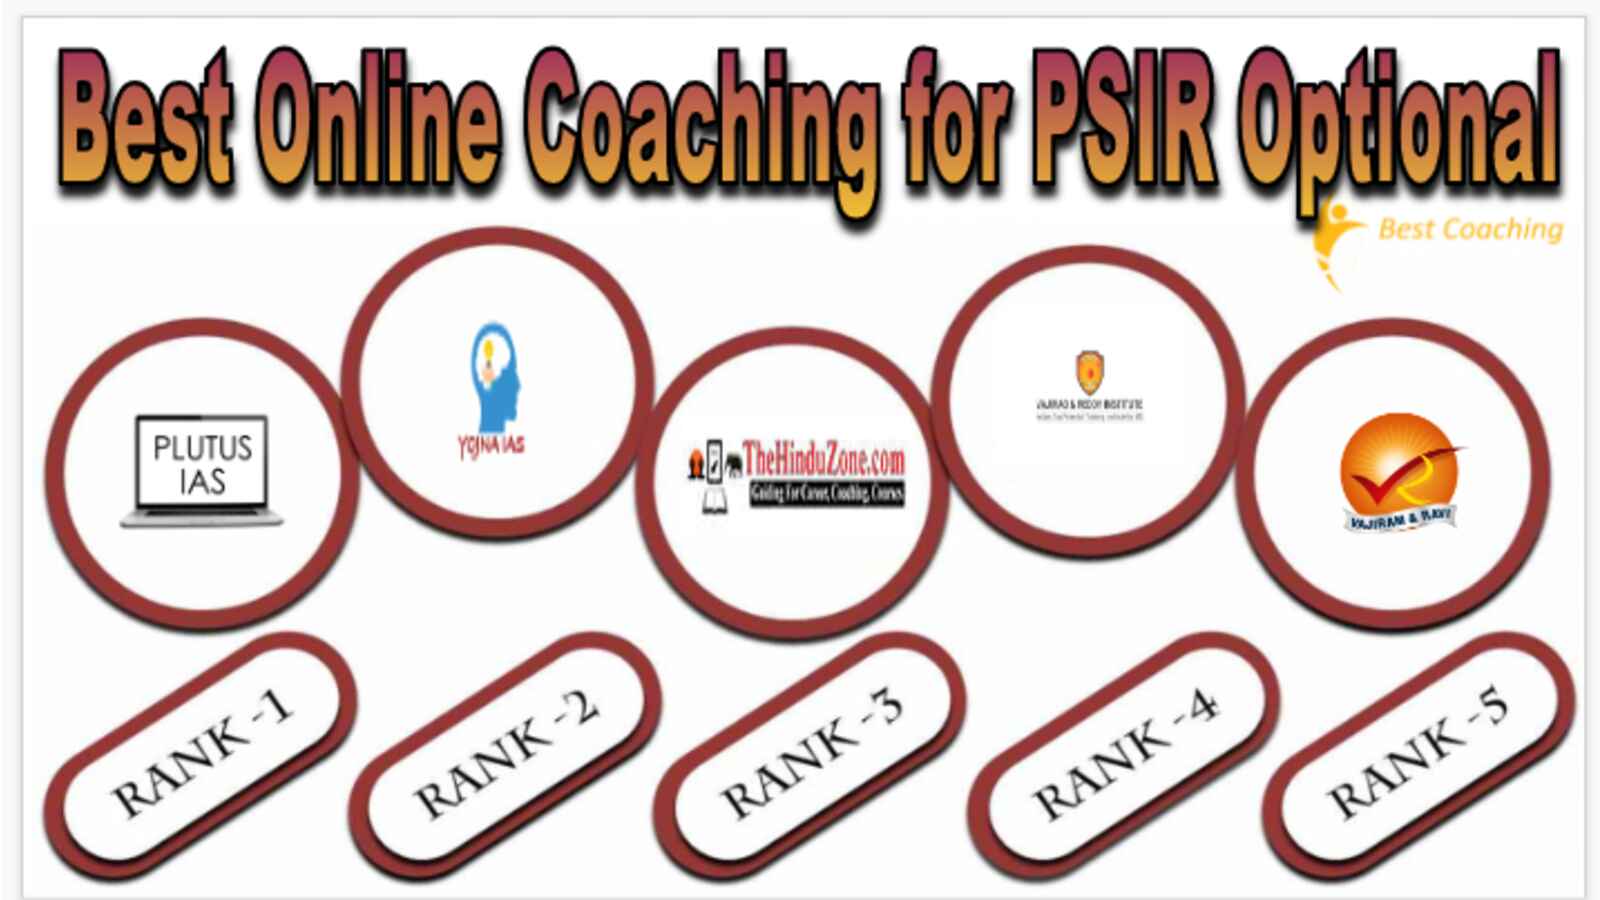 Best Online Coaching for PSIR Optional